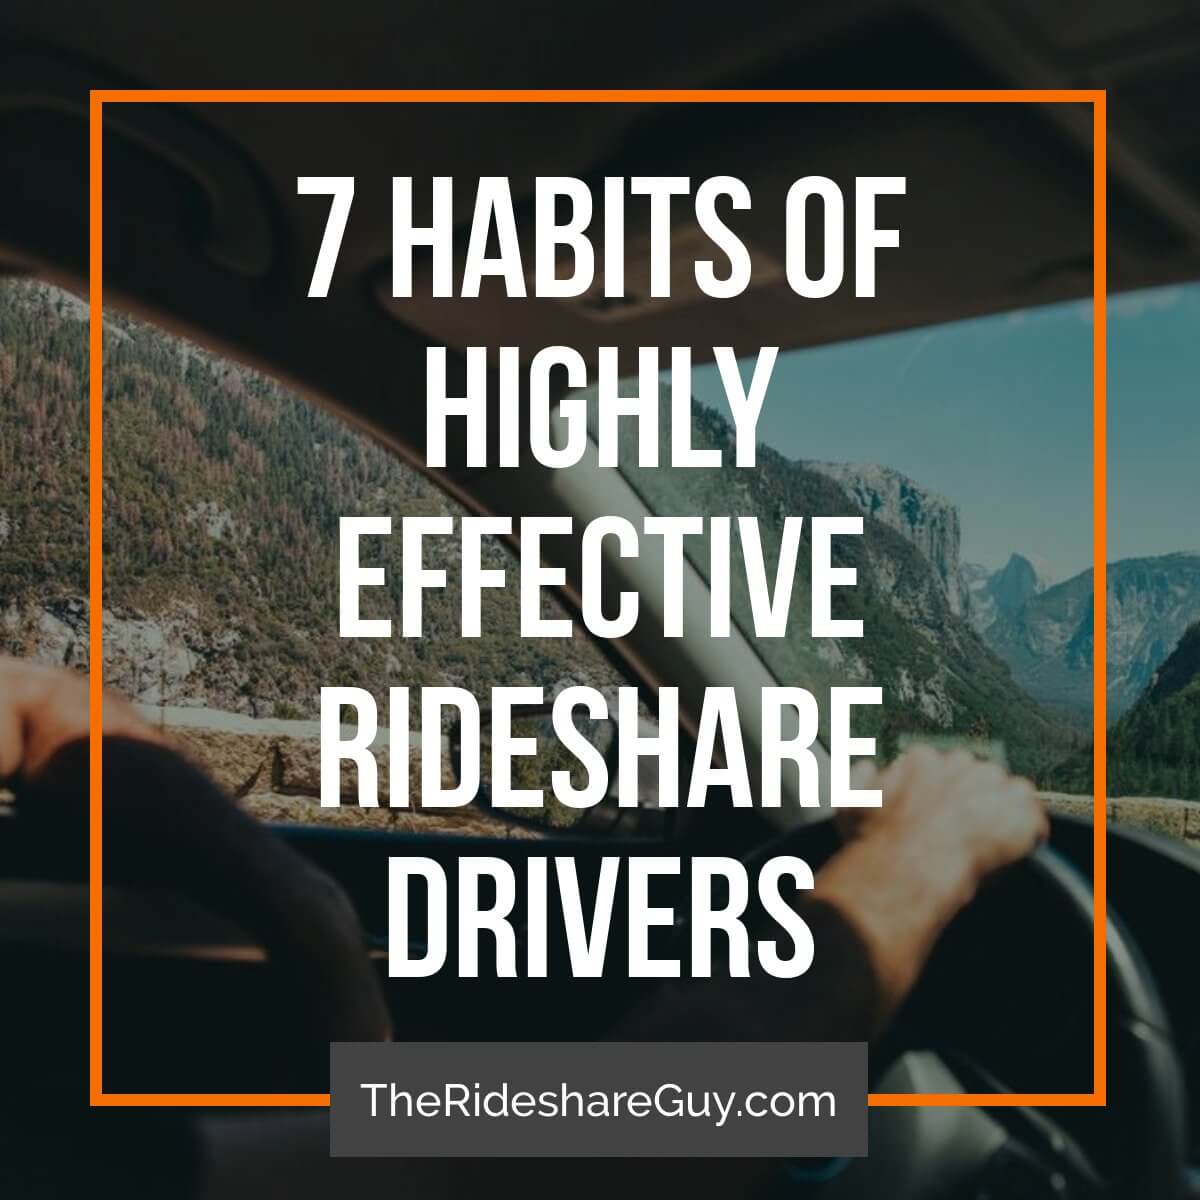 Some drivers just seem to have the whole ridesharing thing down: great ratings, solid tips, and a pragmatic outlook on life. What makes these drivers different? Senior RSG contributor John Ince covers the 7 habits of highly effective rideshare drivers - do you agree?